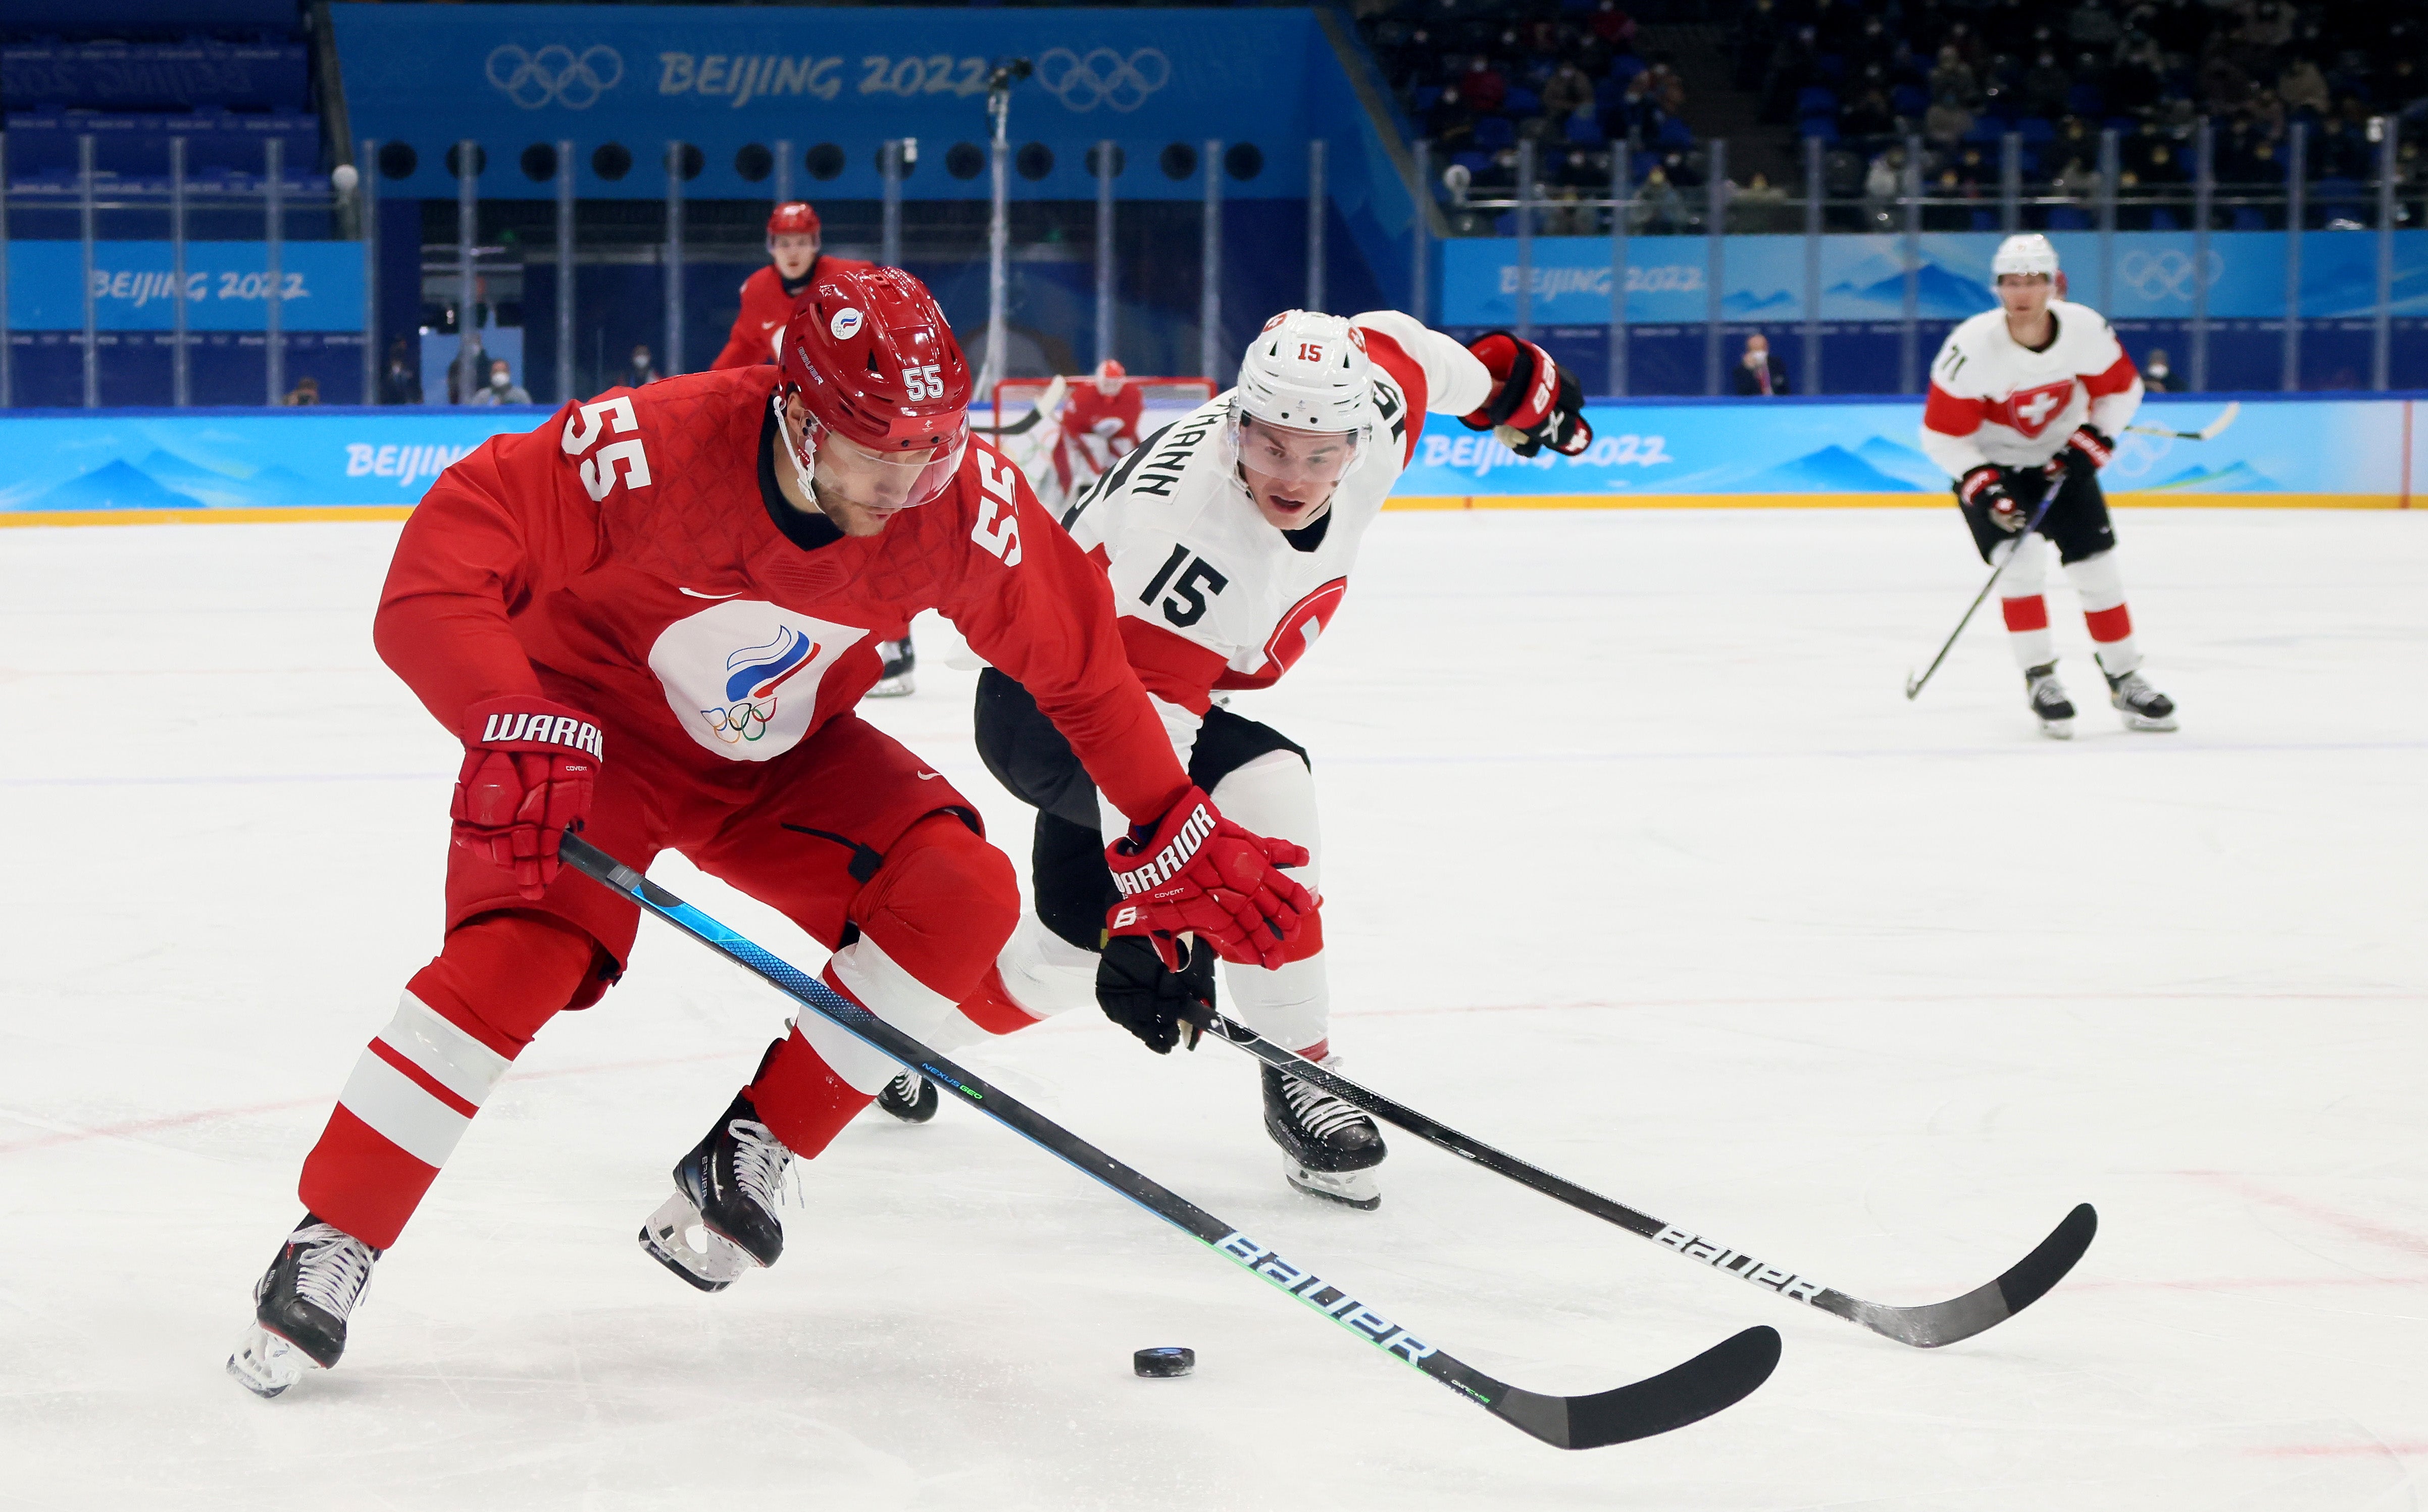 Winter Olympics Absence of NHL stars leads to wide-open mens ice hockey tournament full of intrigue The Independent